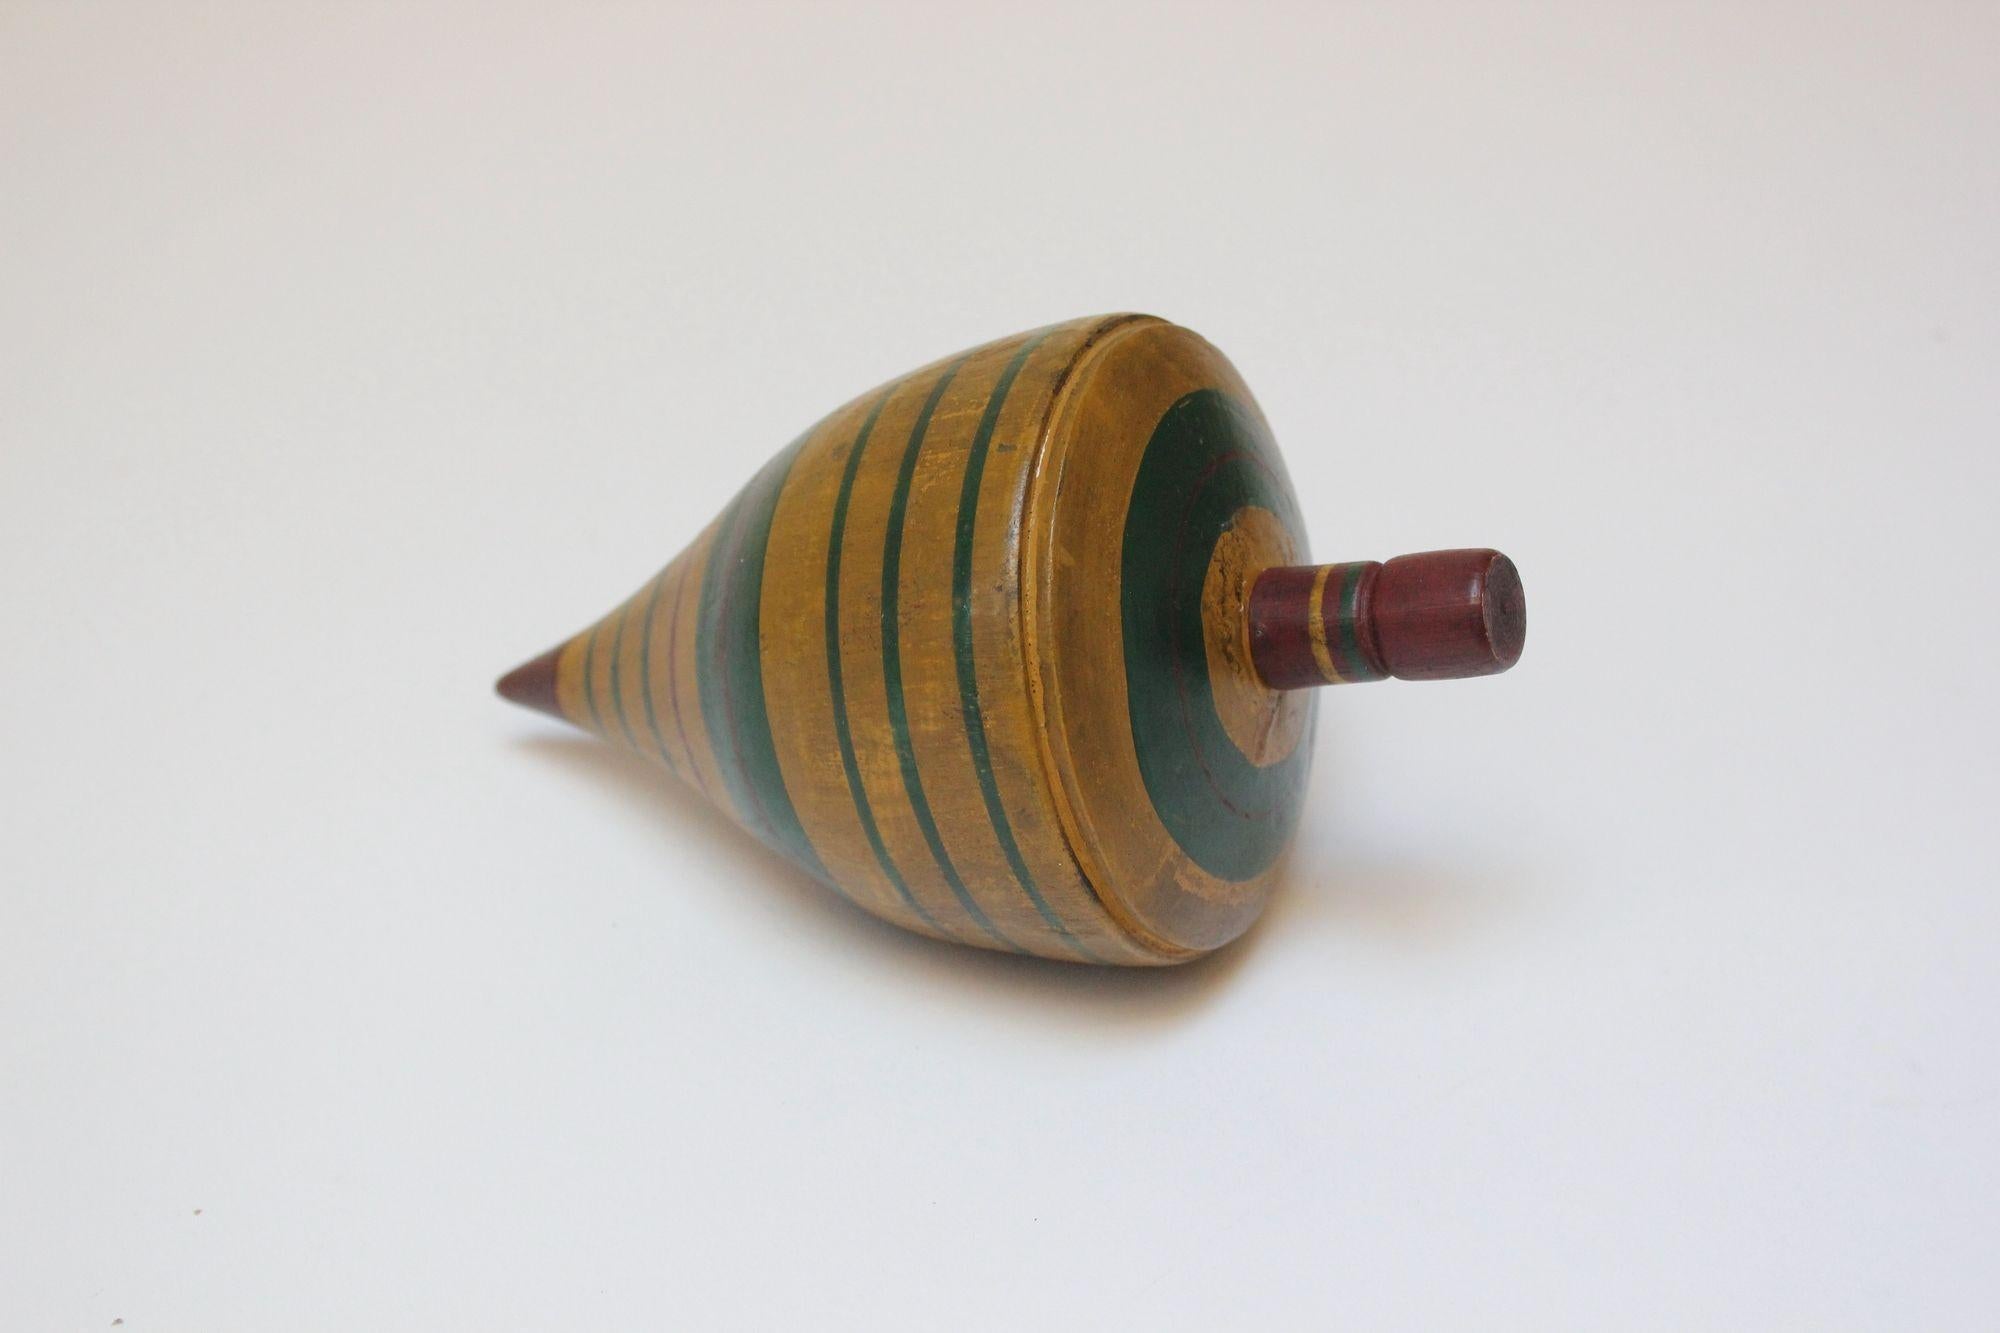 American Antique Folk Art Painted Spinning Top Toy For Sale